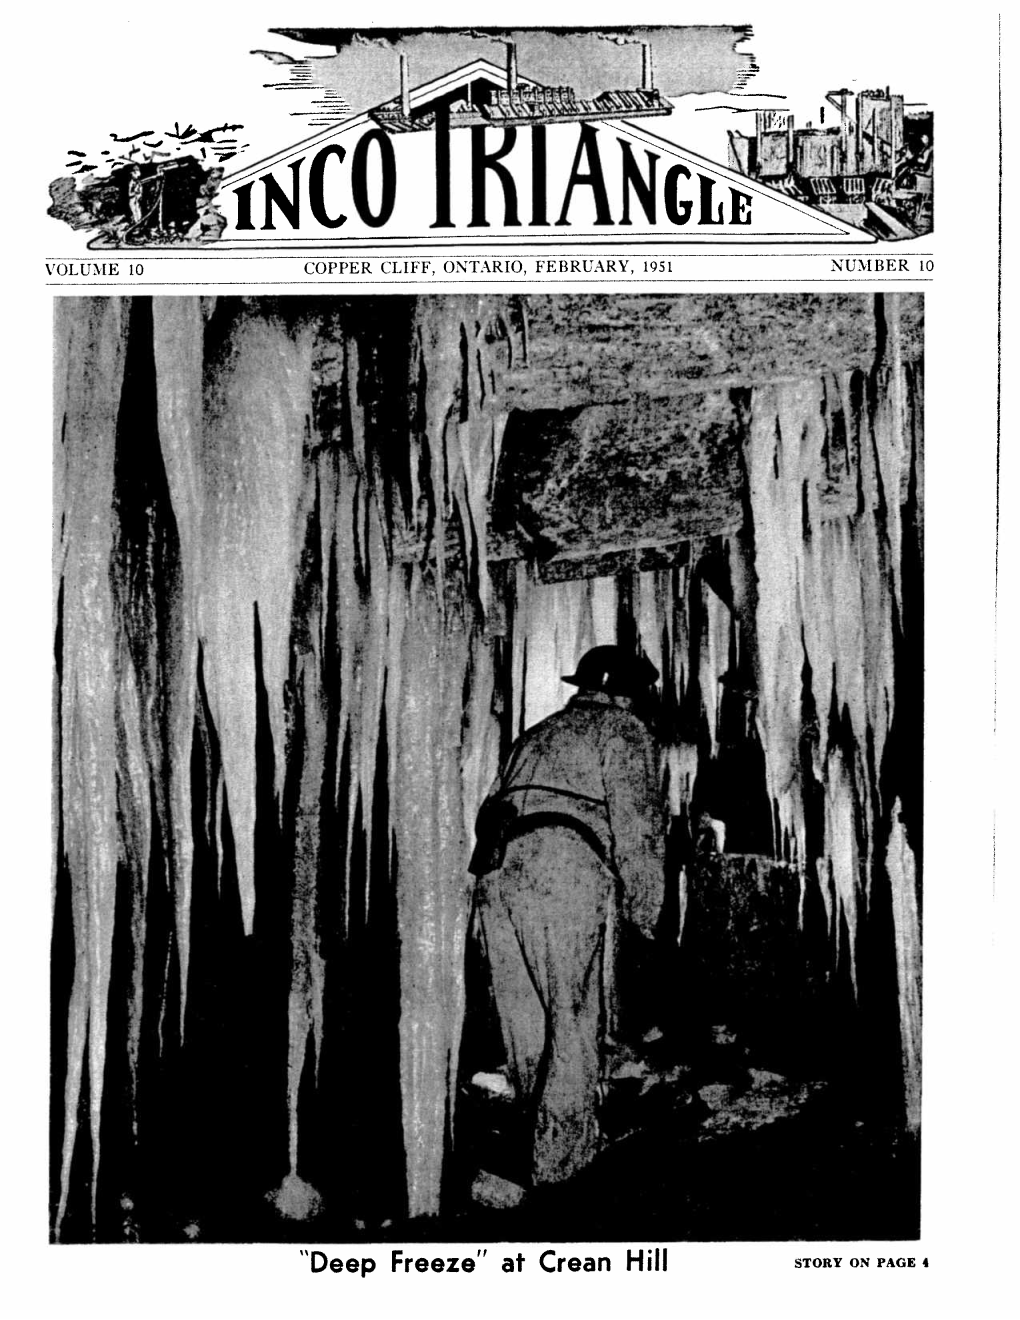 Deep Freeze" at Crean Hill STORY on PAGE 4 Page 2 INCO TRIANGLE FEBRUARY, 1951